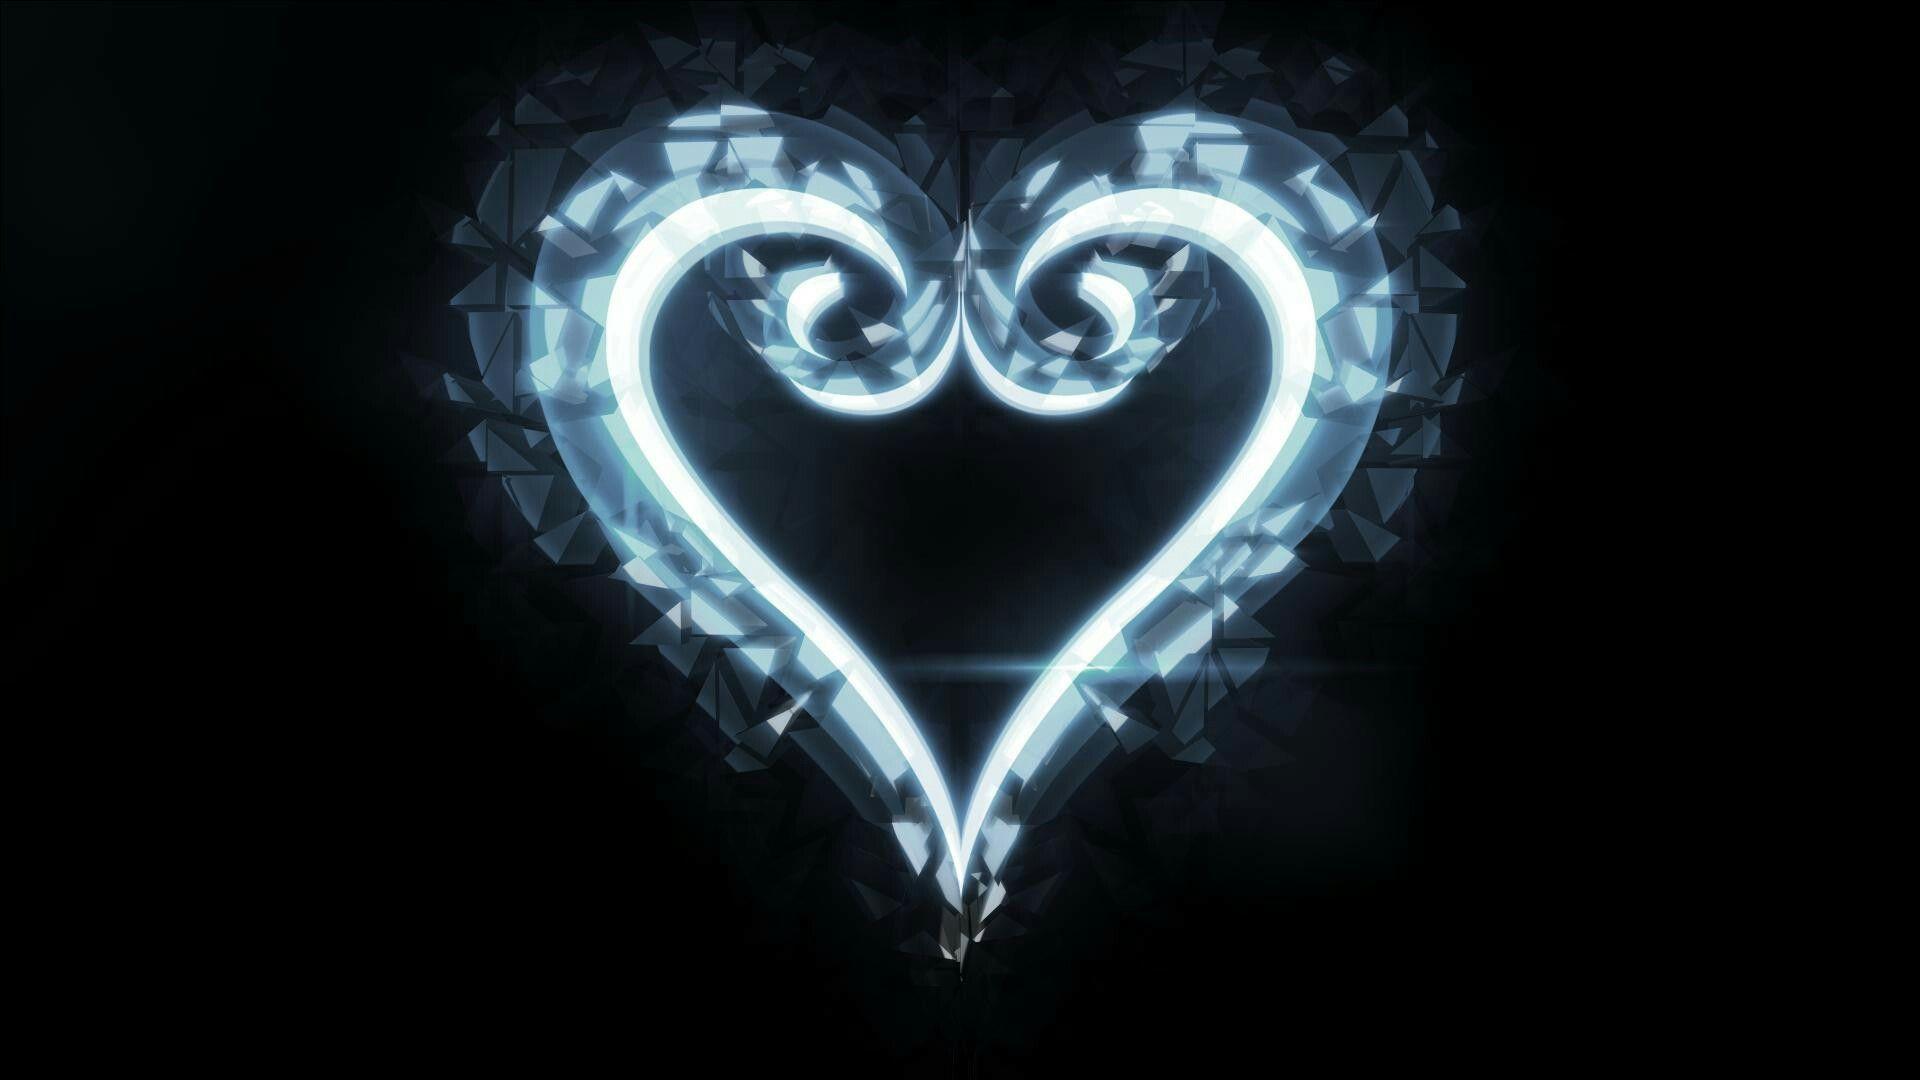 Heartless Wallpaper Hd - Kingdom Hearts Heartless Wallpapers | Exchrisnge